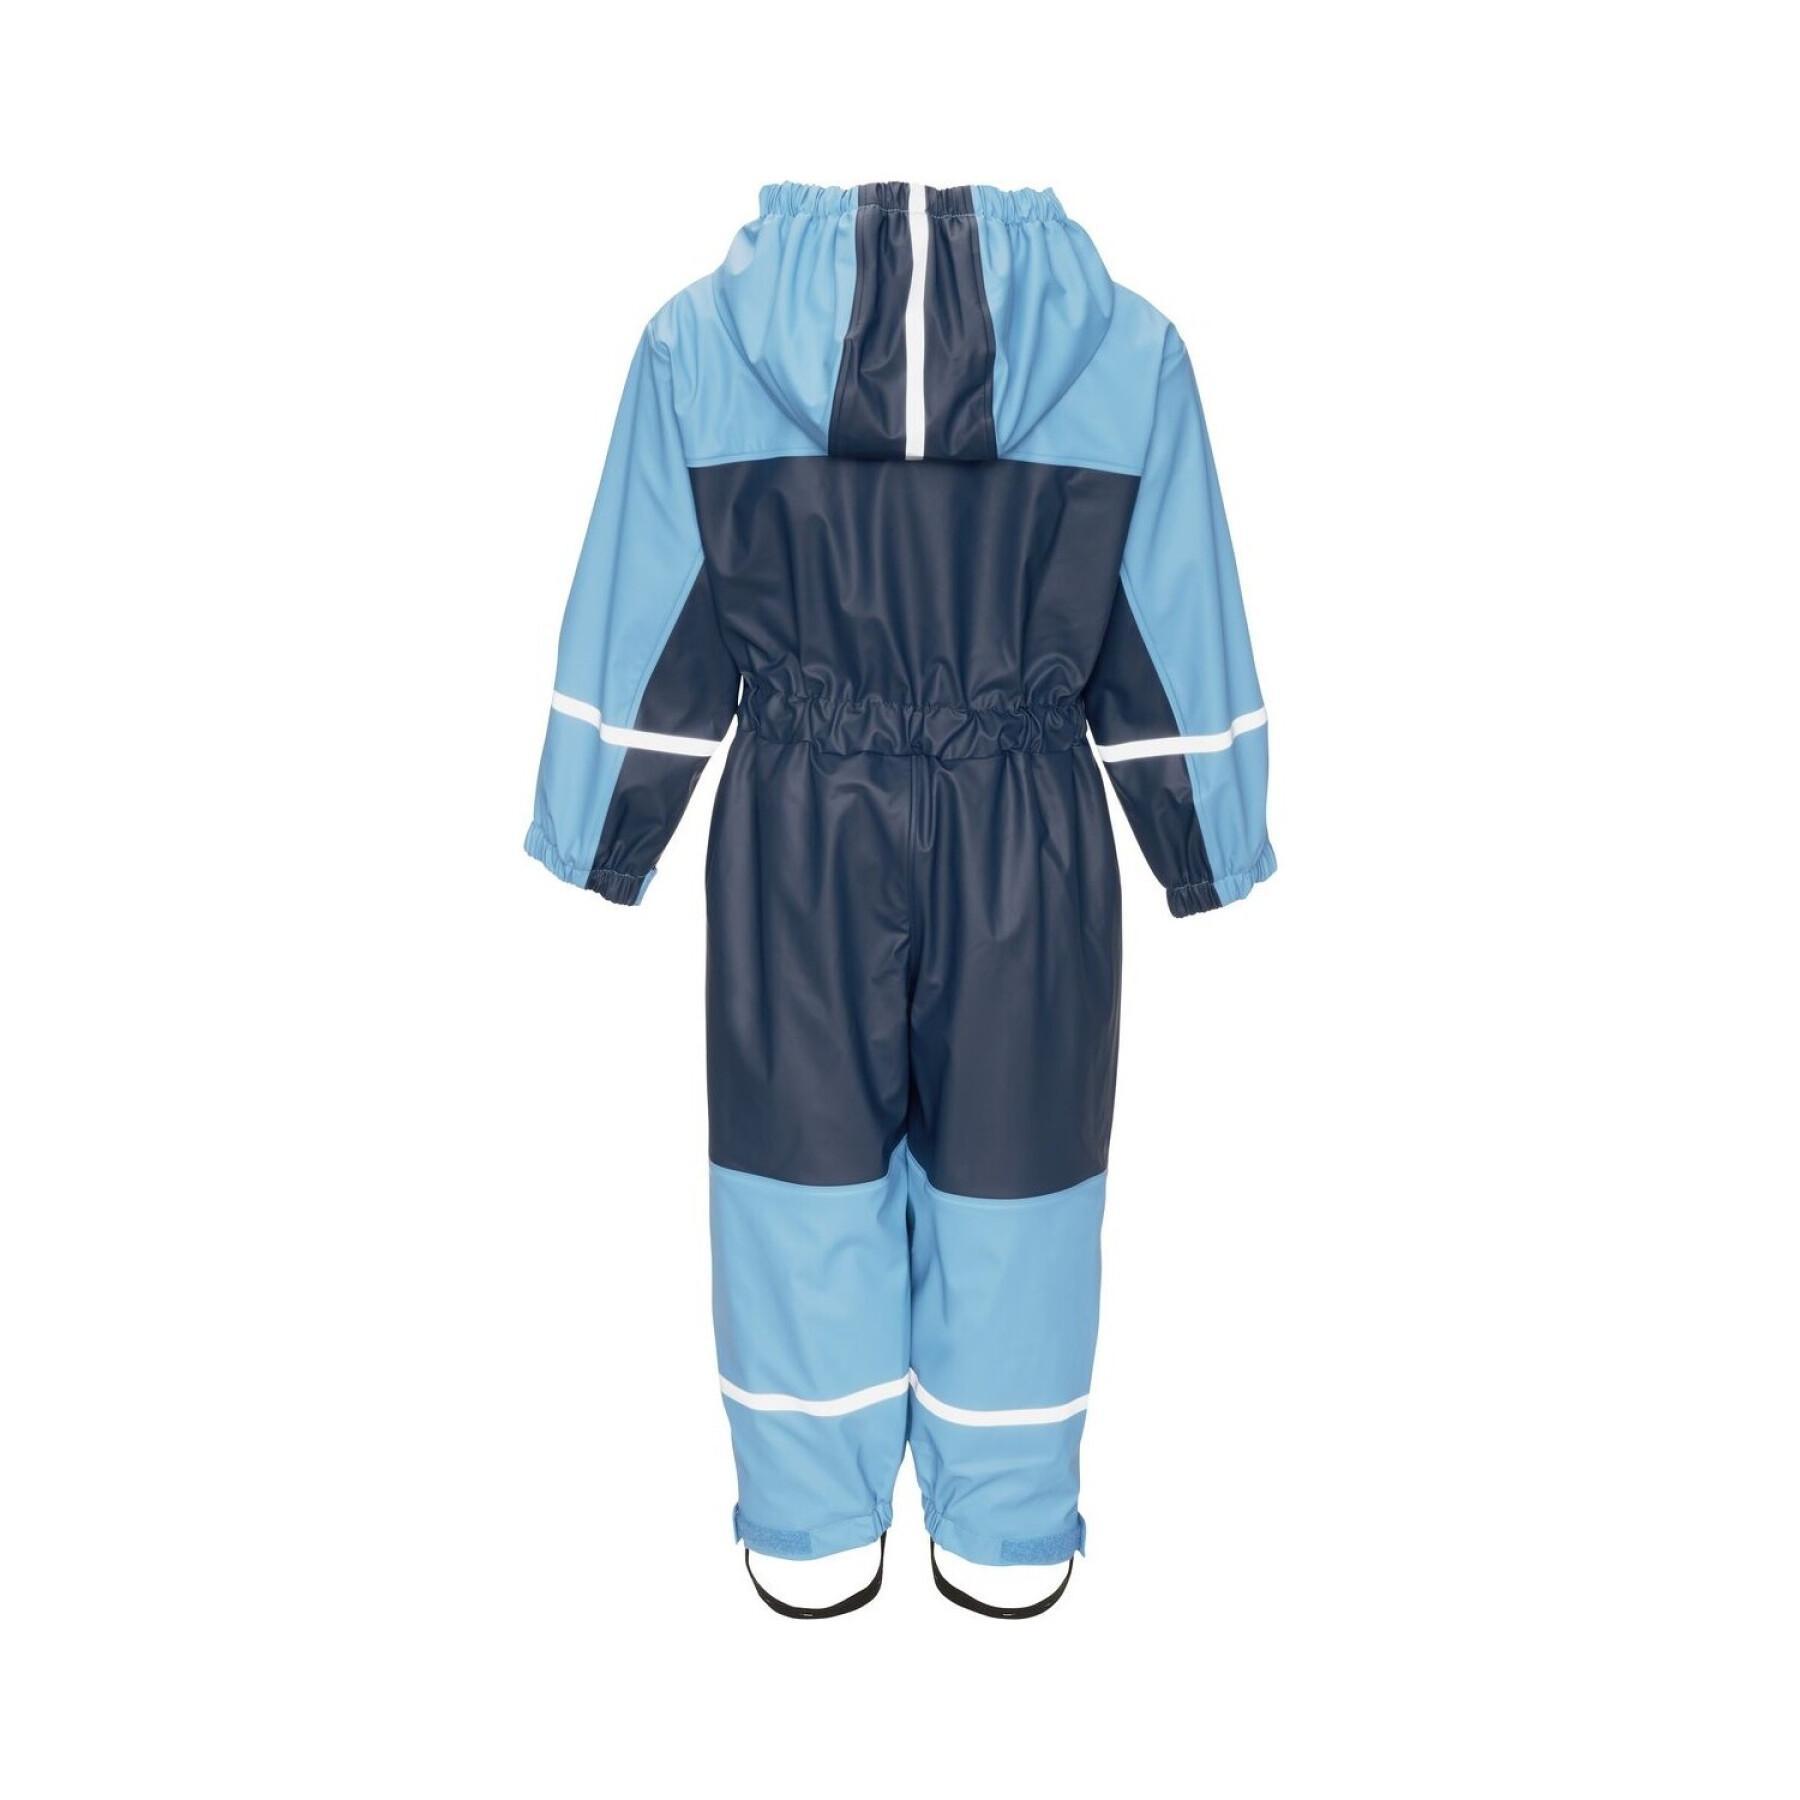 Basic rain suit with baby fleece lining Playshoes